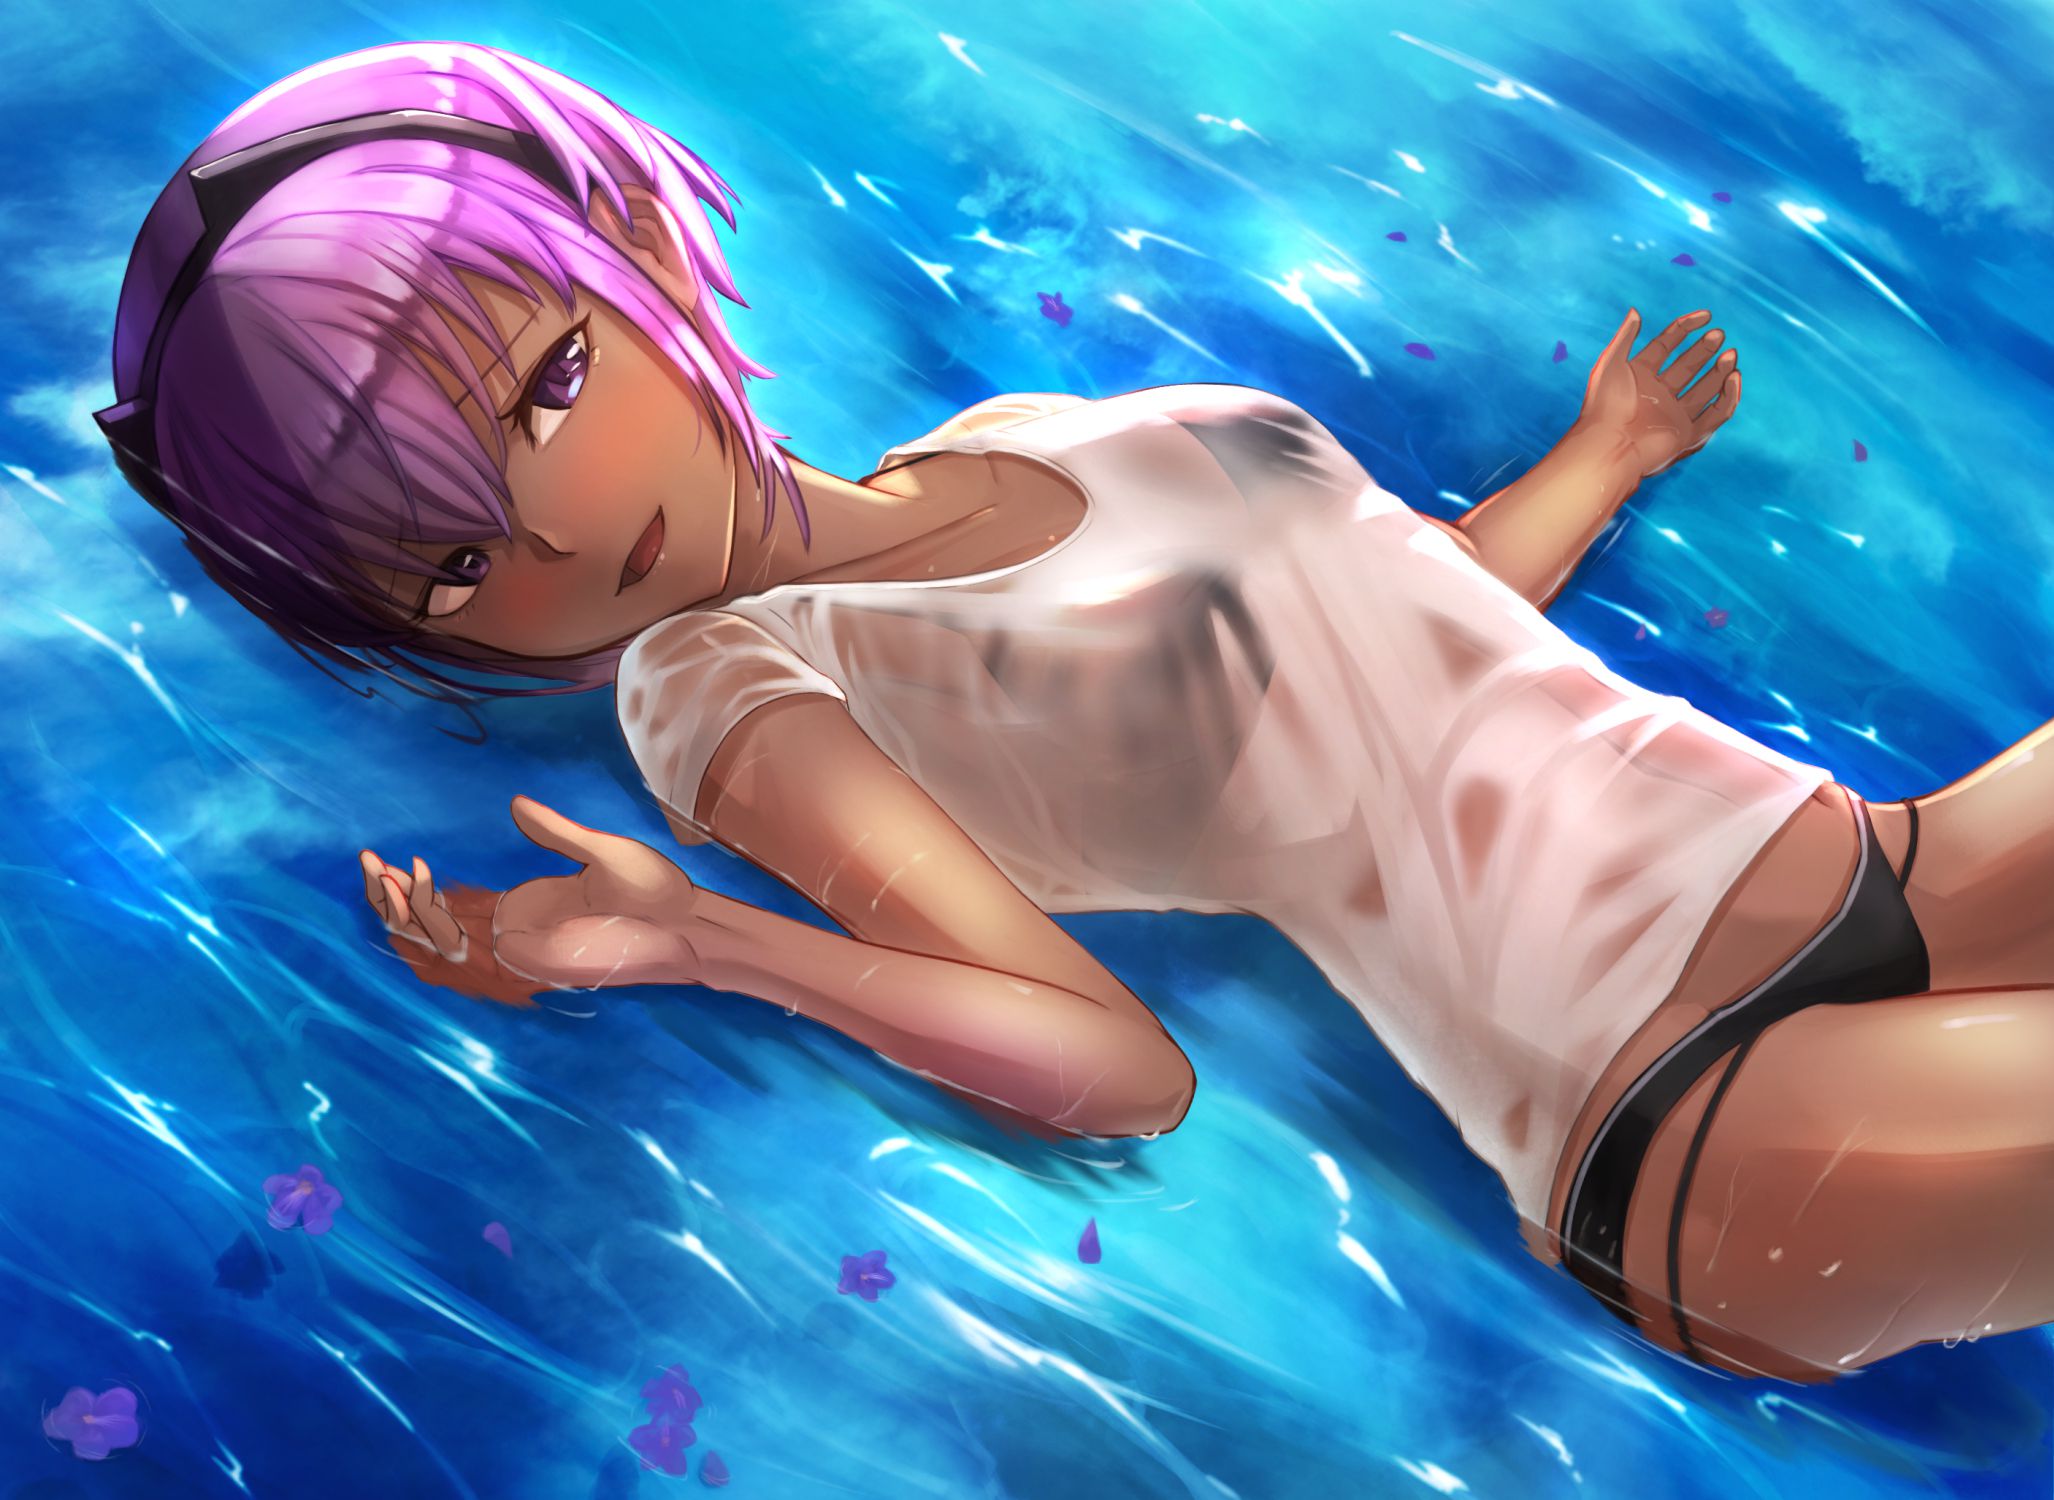 Erotic anime summary Erotic image collection of wet transparent beauties and beautiful girls that are transparent variously [50 sheets] 38